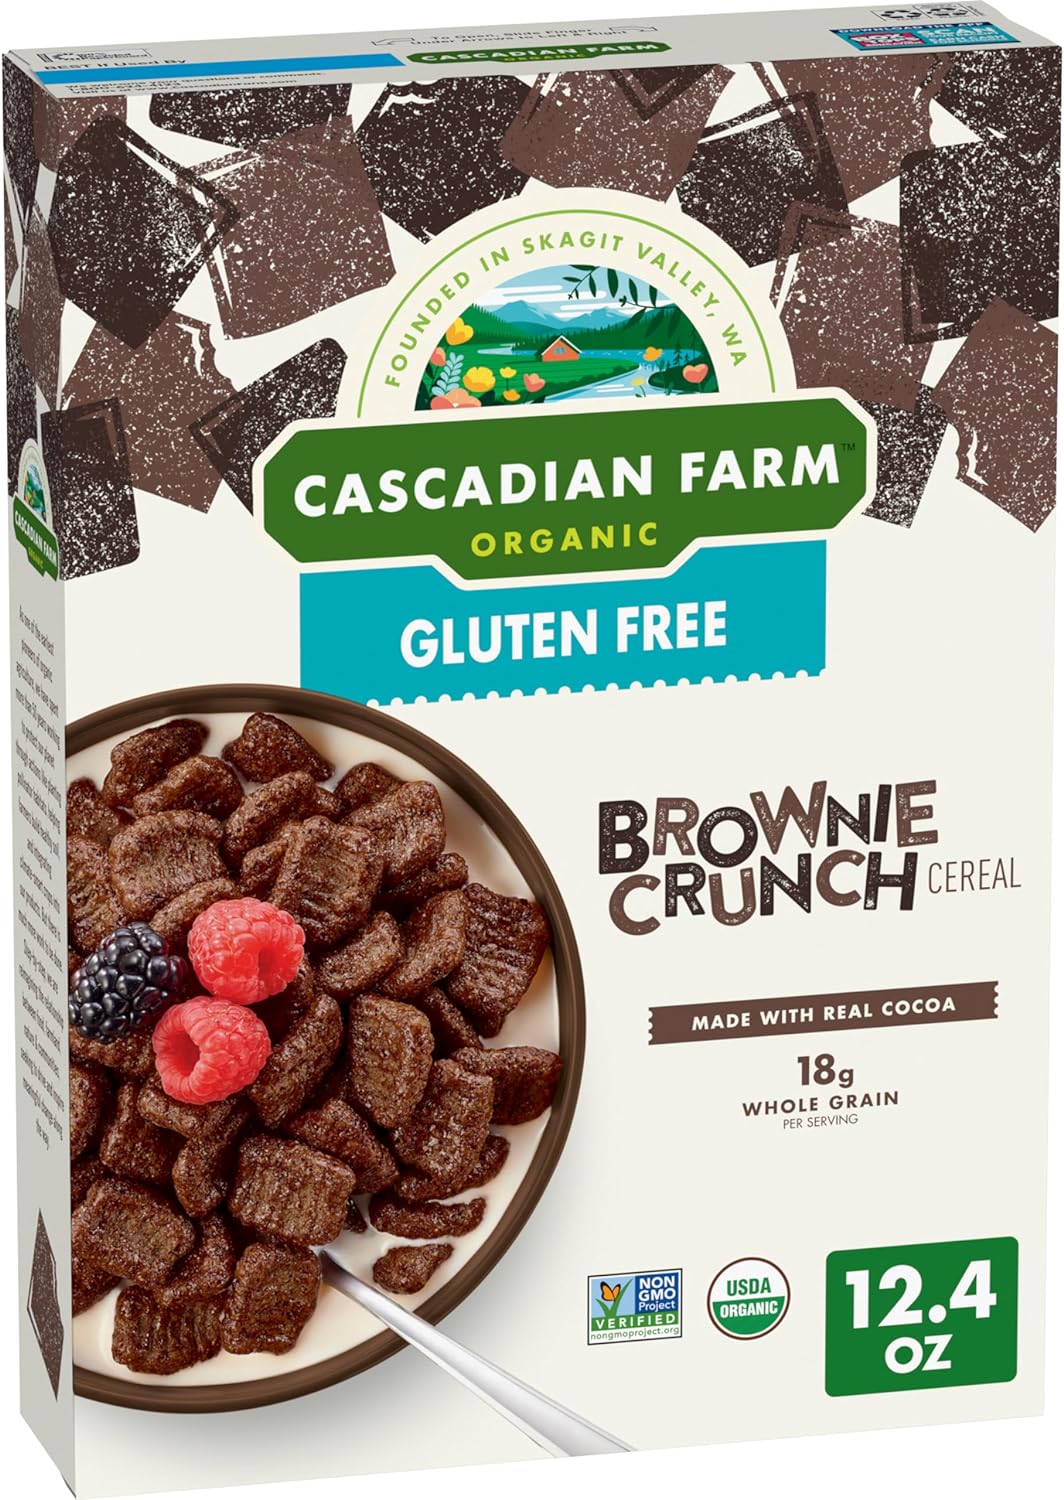 Cascadian Farm Organic Gluten Free Brownie Crunch Cereal Review